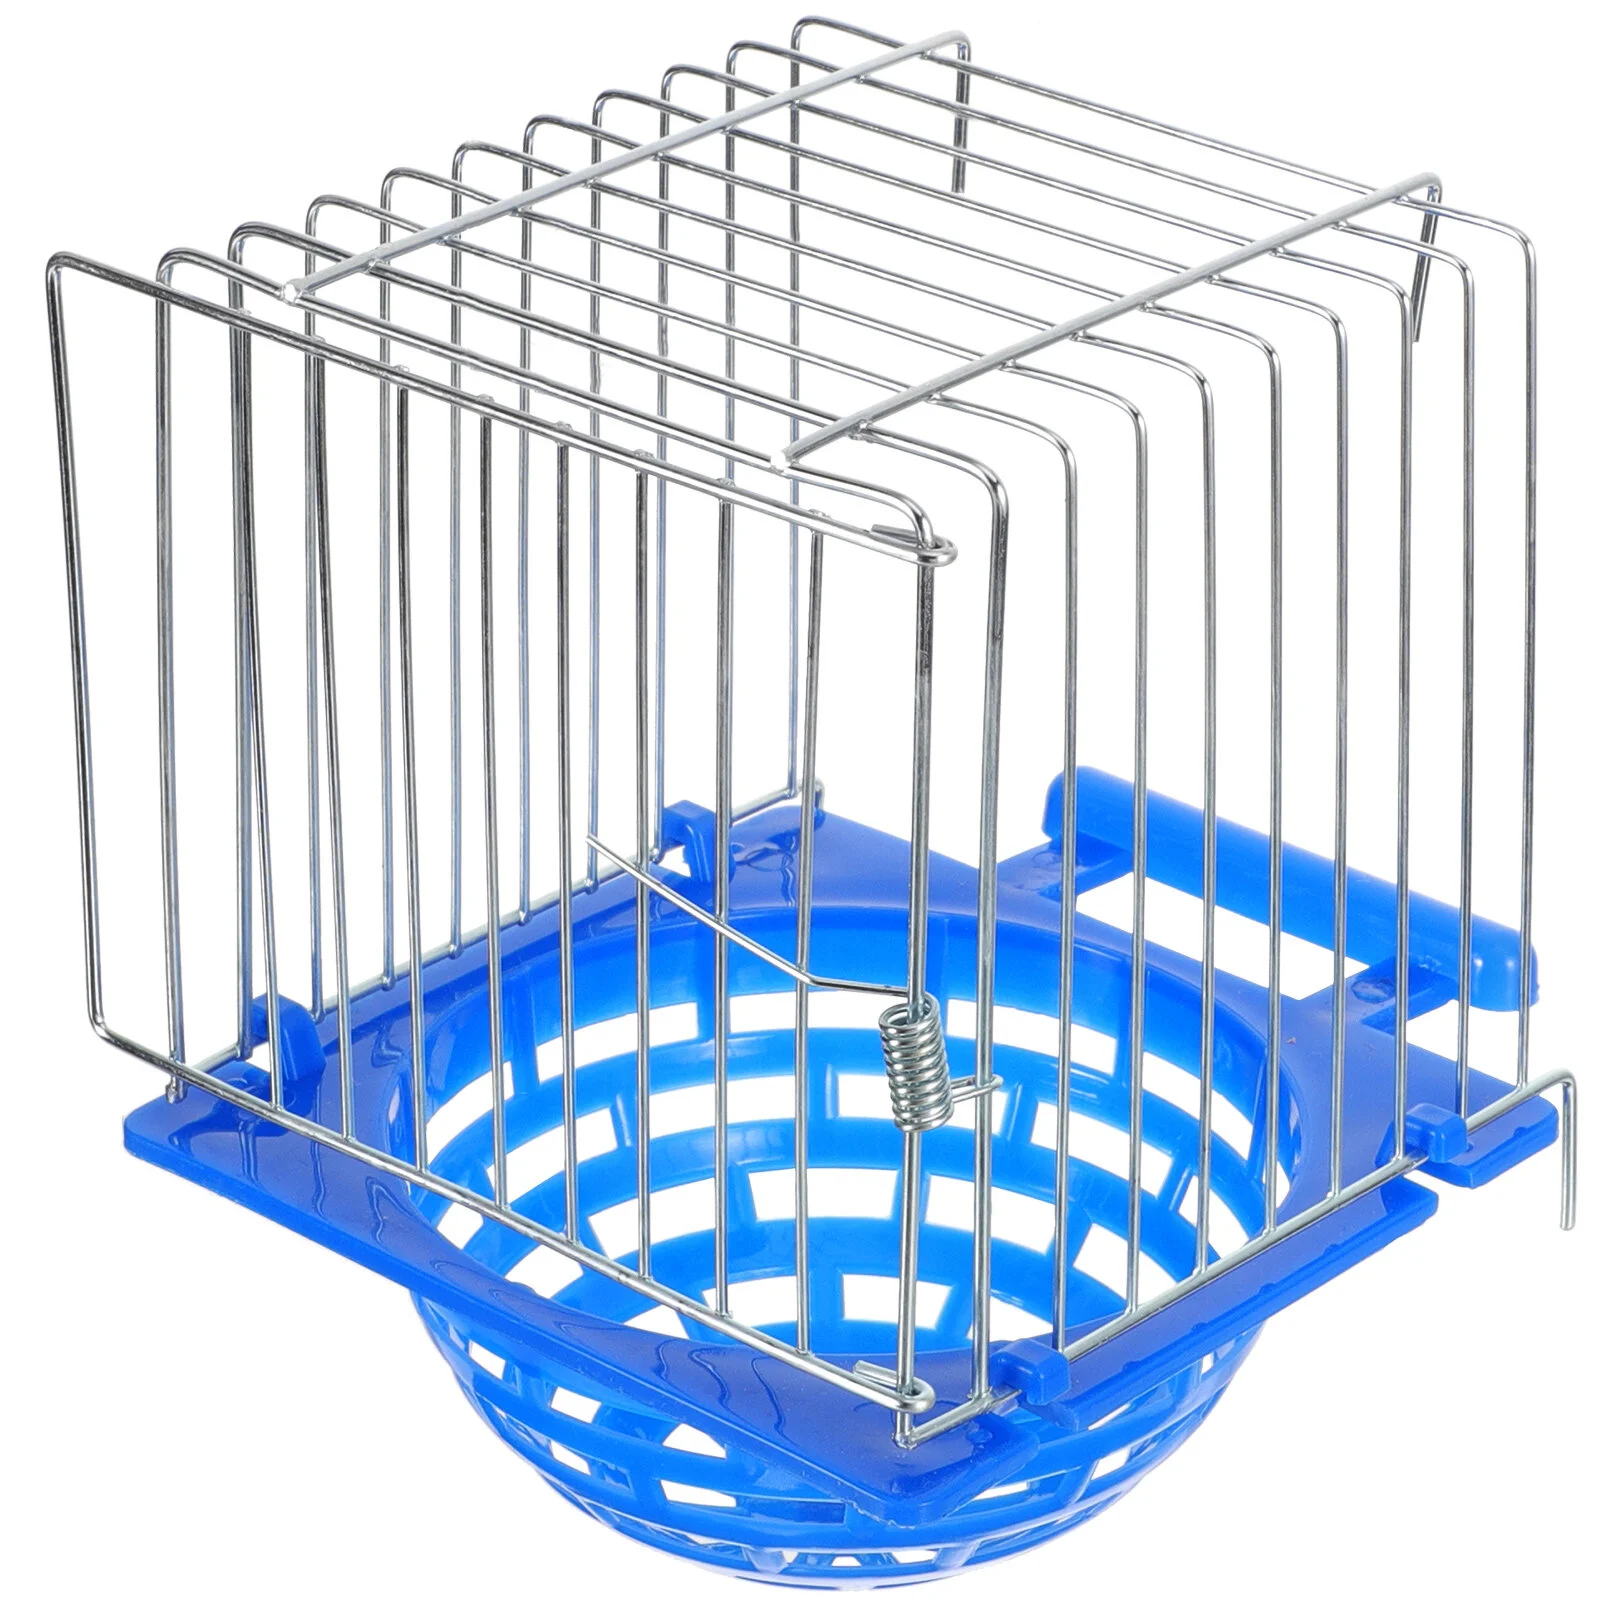 

Breeding Box Hanging Cage Nest Bird Sturdy Peony Cages Parrot Hideaway Shelter Iron Wire Bed Pigeon Relaxing Basin Container